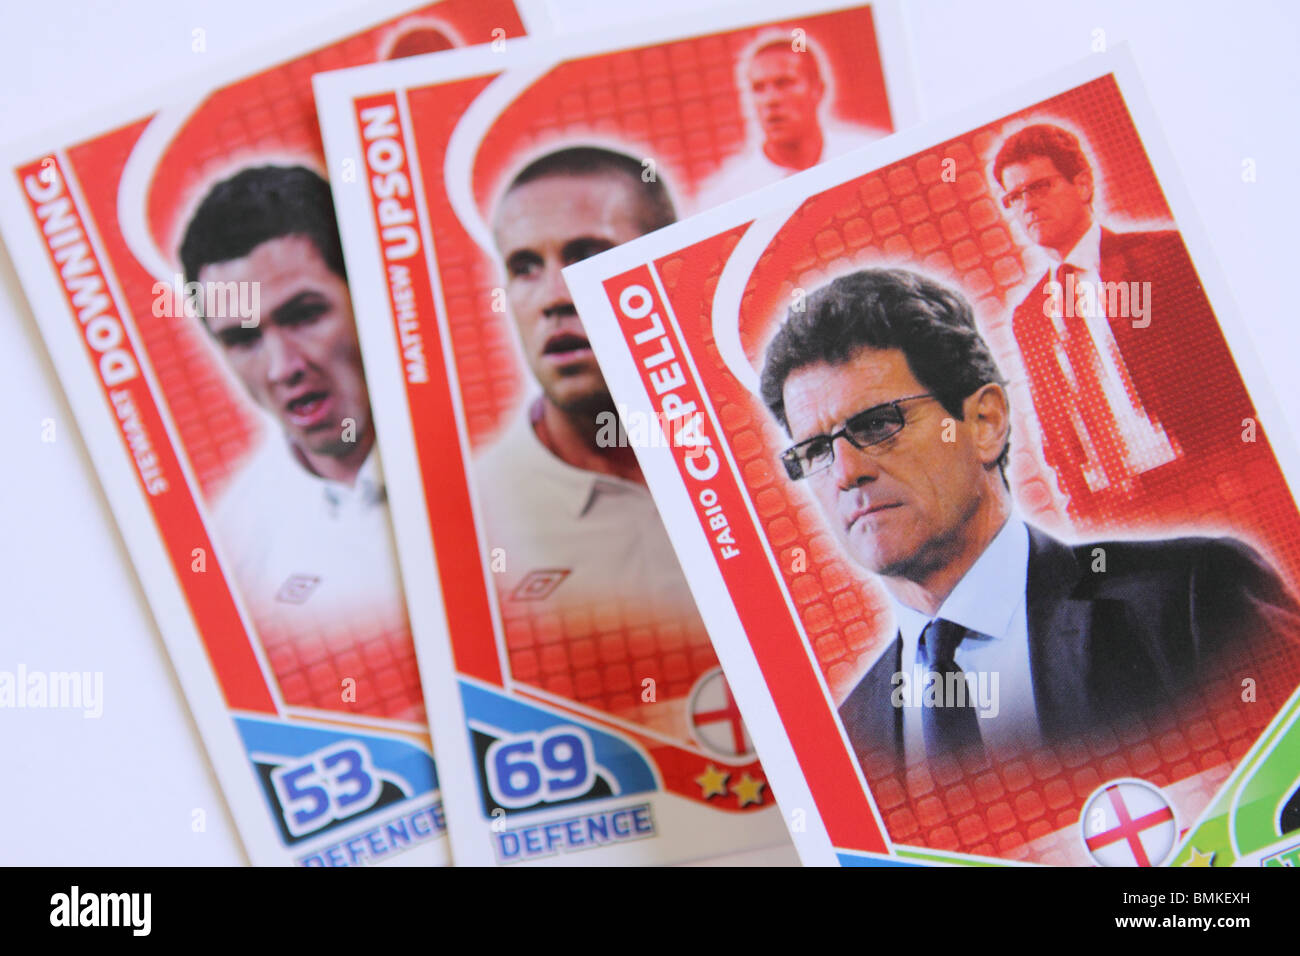 World Cup 2010 Fabio Capello football collectors cards produced by Topps Match Attax Stock Photo